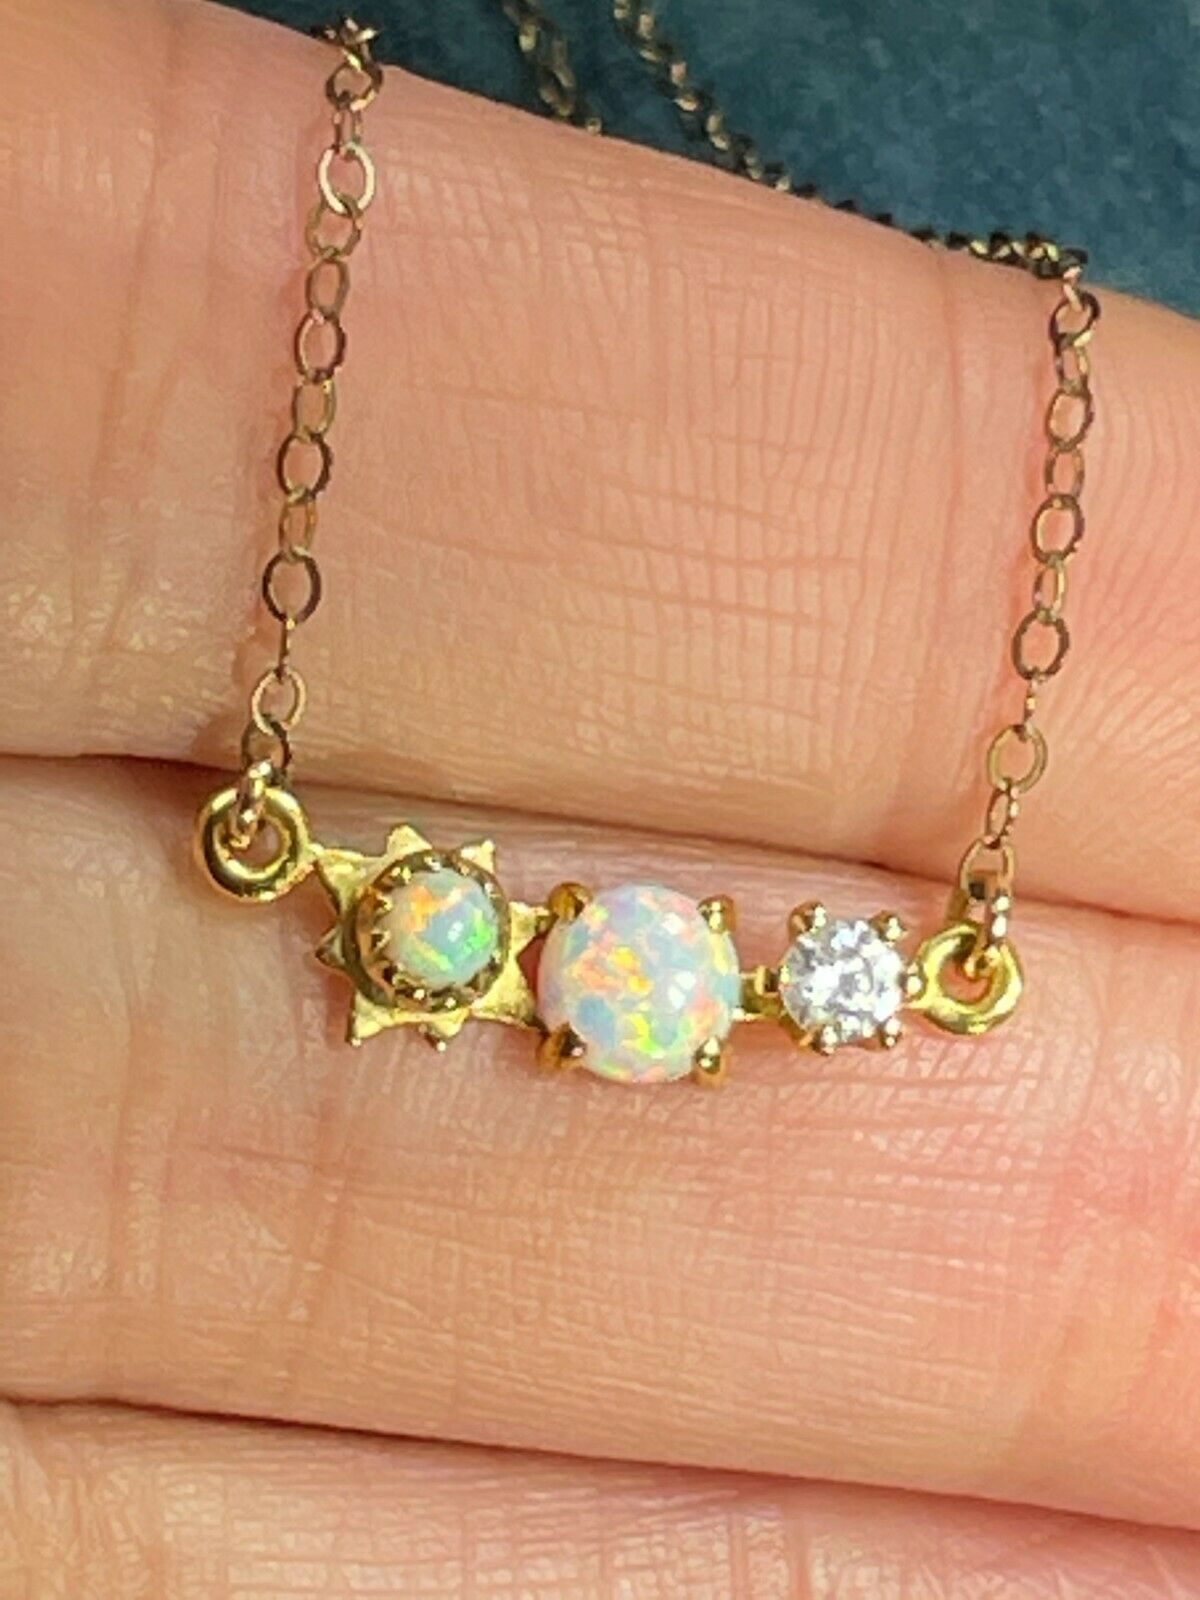 14k Yellow Gold Filled Chain Necklace w Lab Opal Pendant in 925. Tiny!_b55_12_20